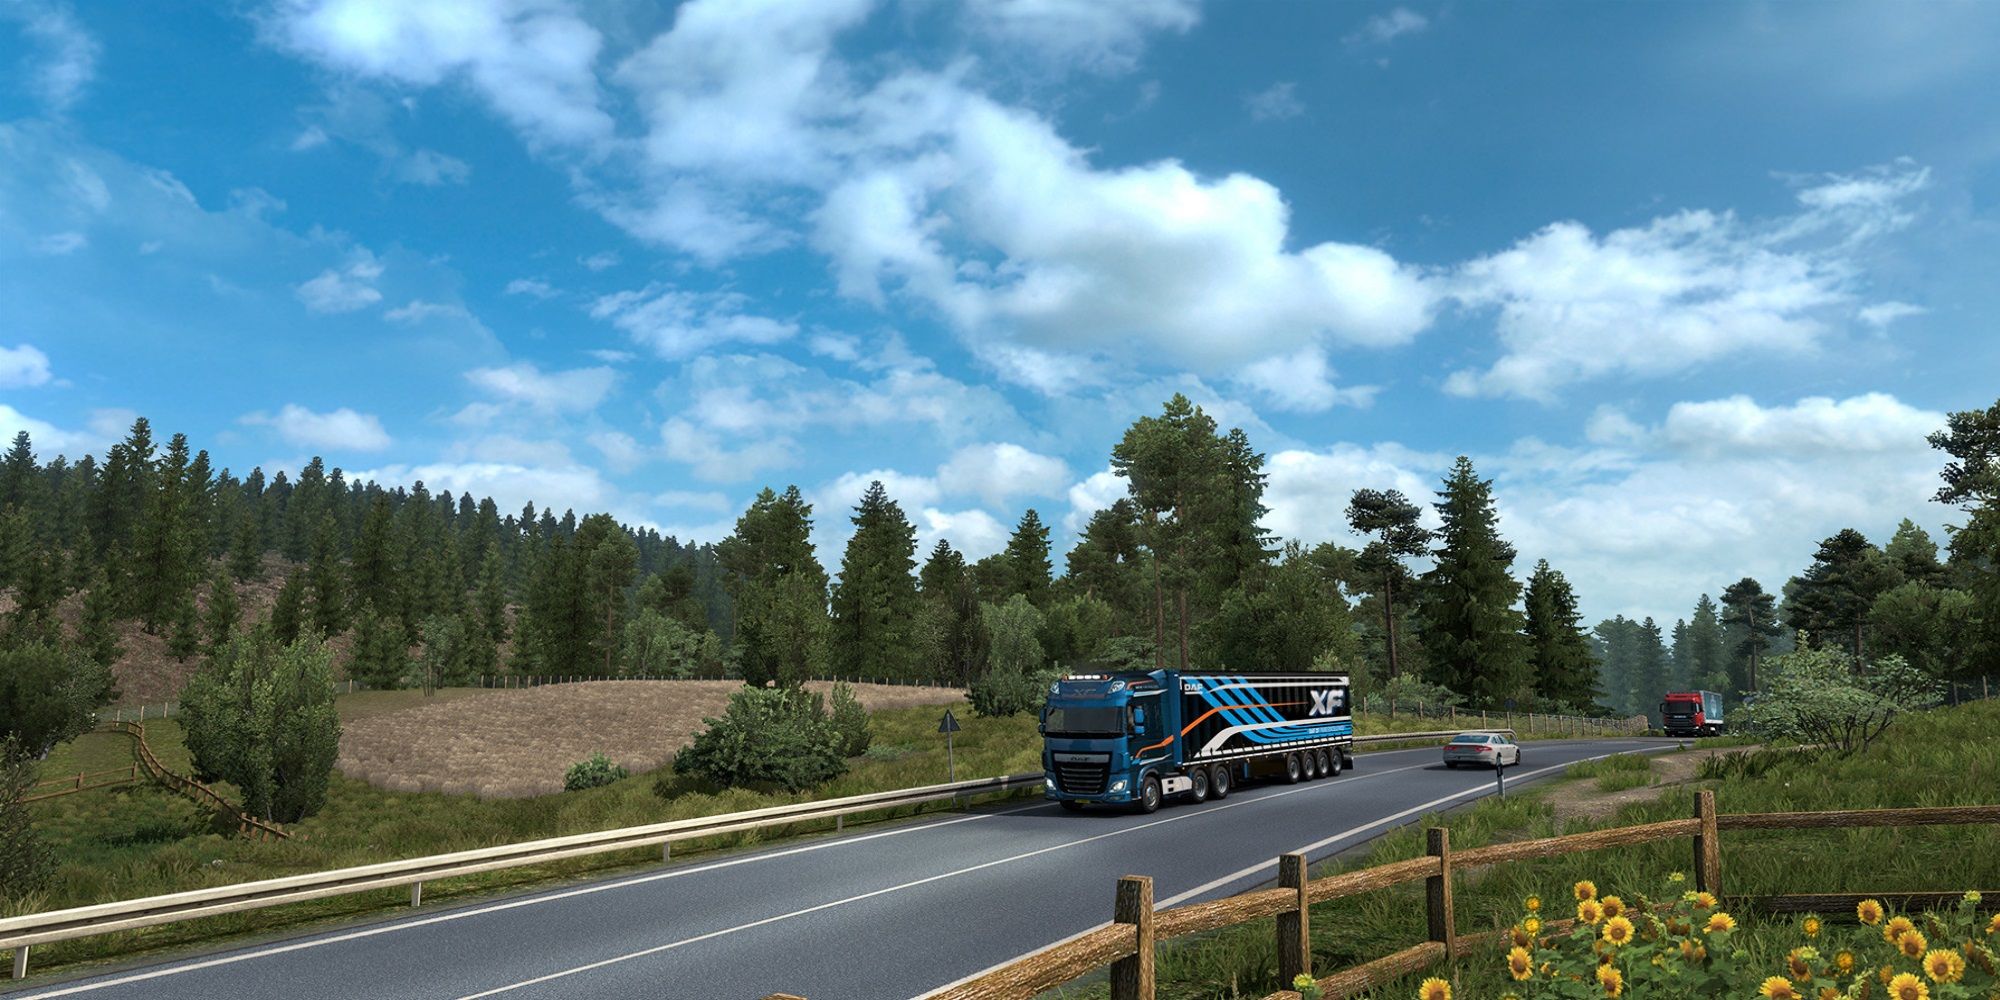 ETS 2 - Field of trees